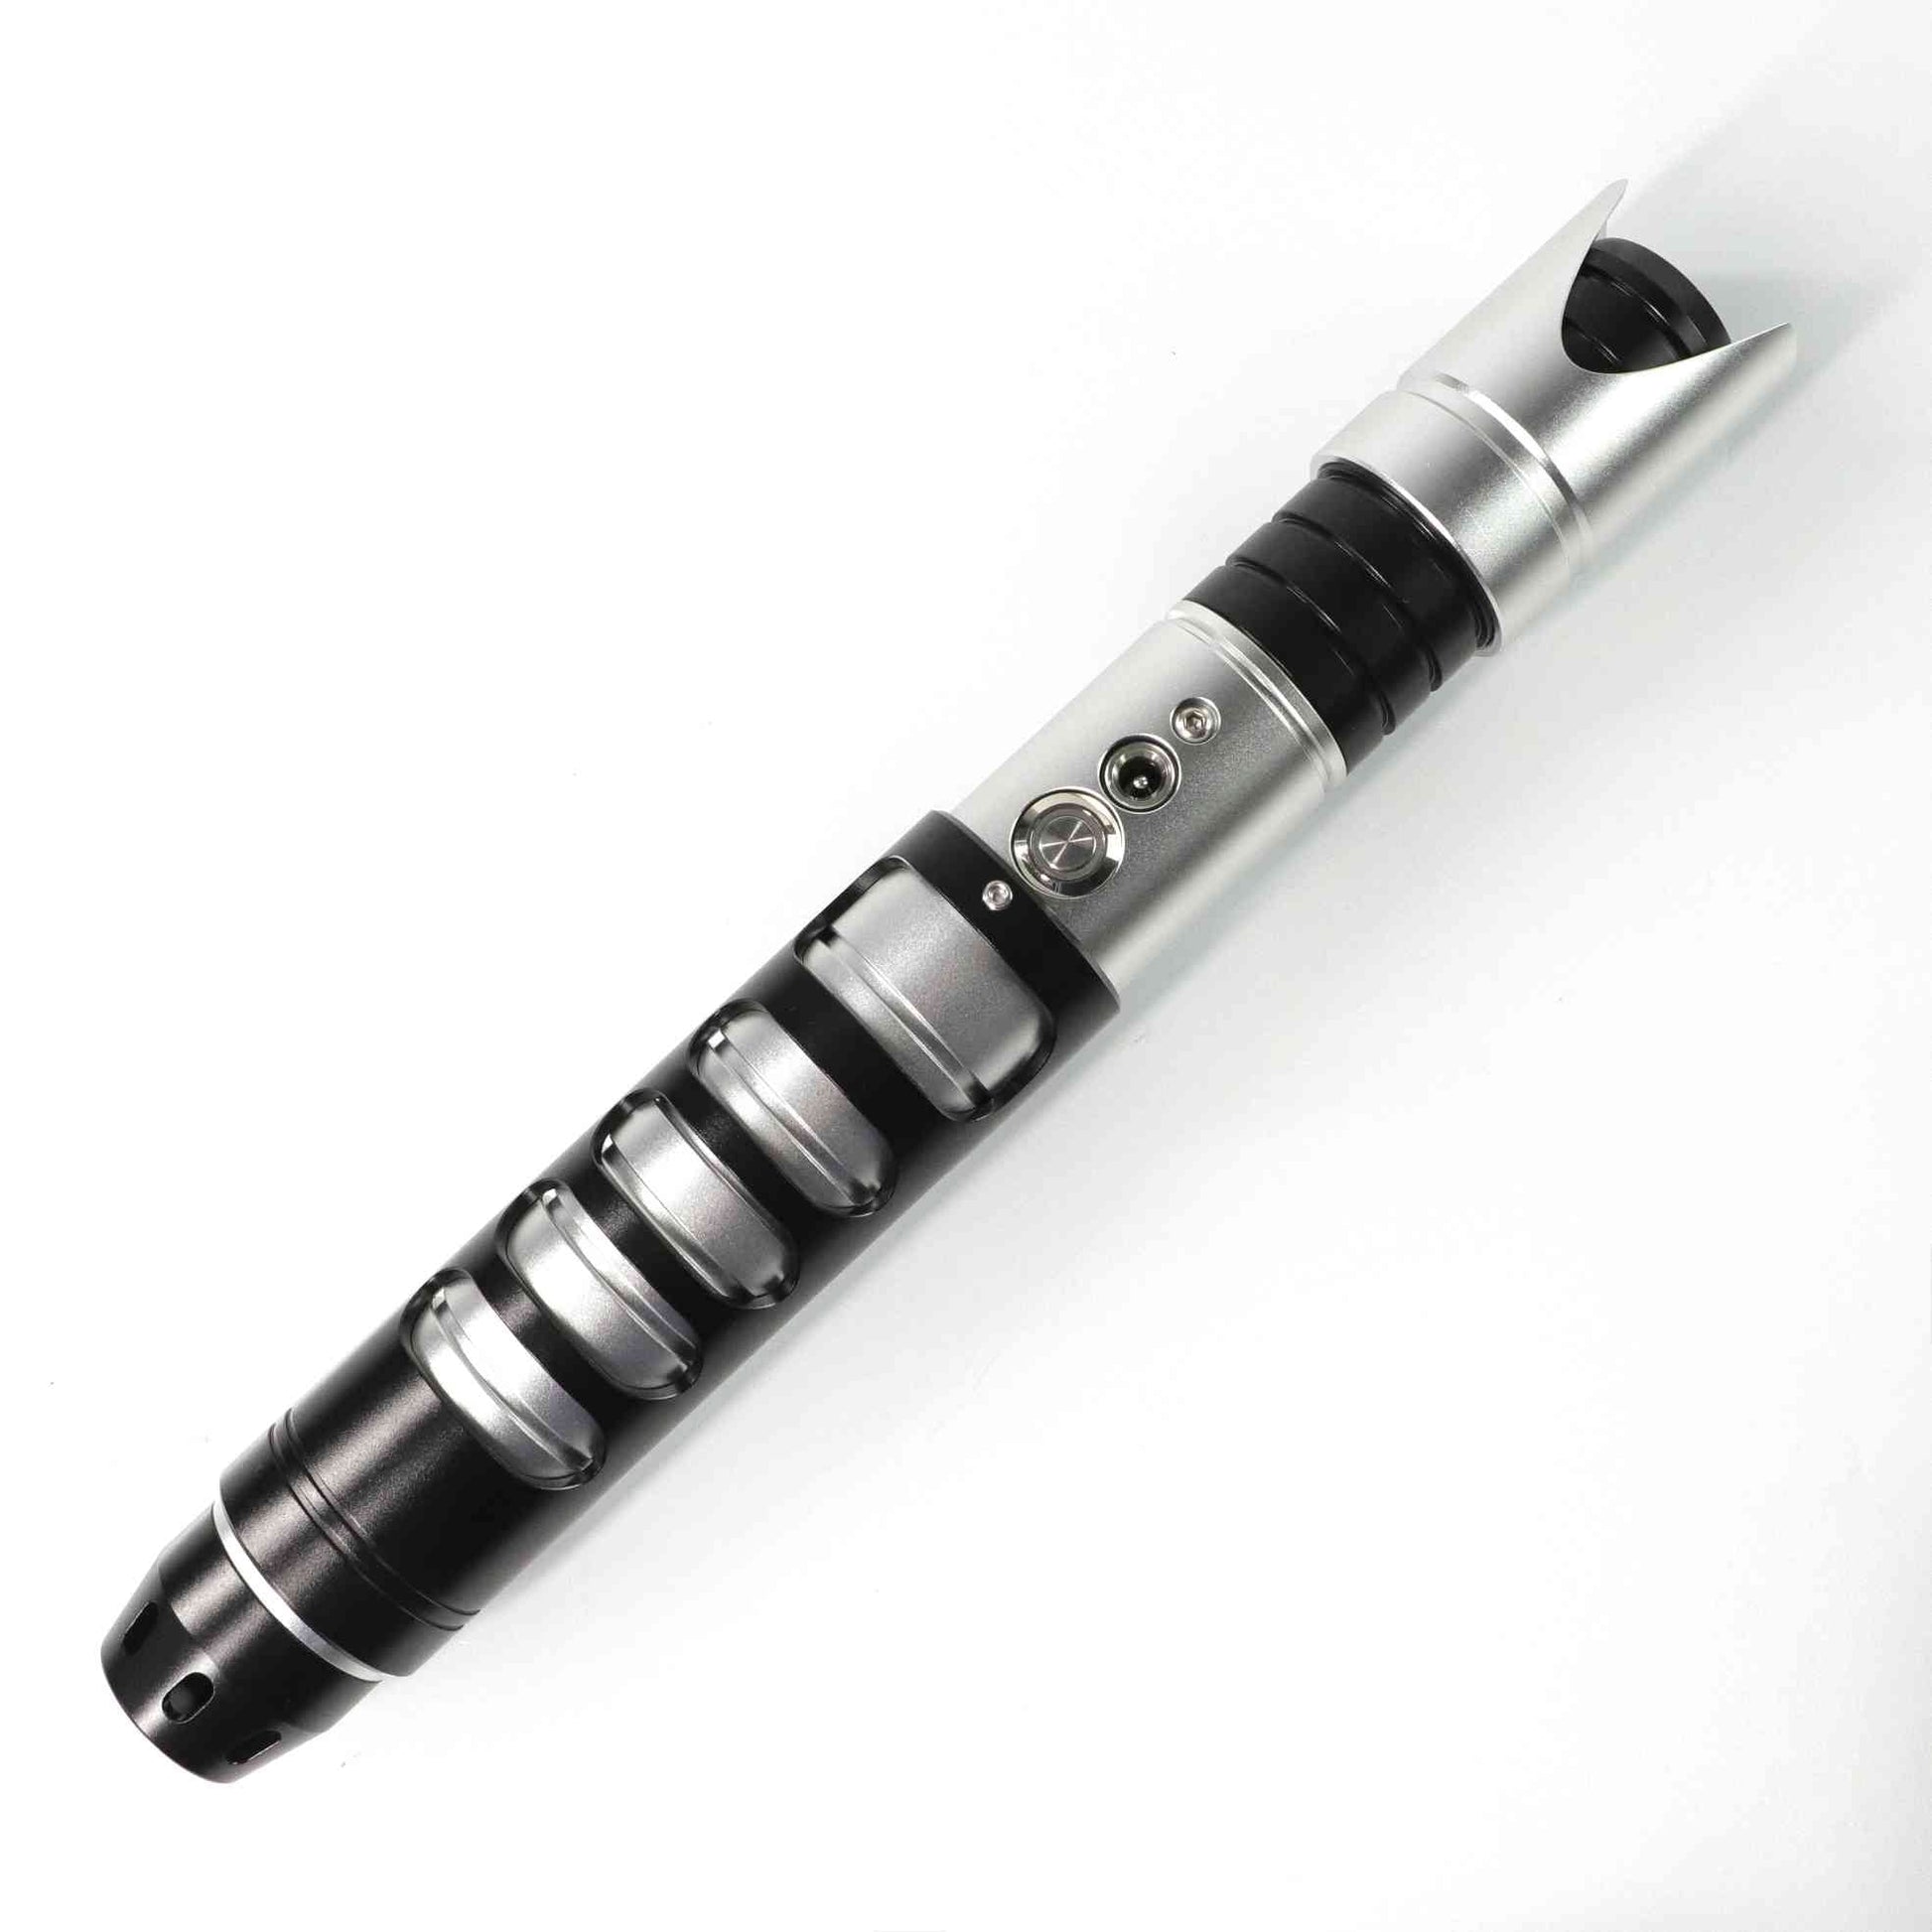 Cedar Lightsaber Black and silver / RGB isabers